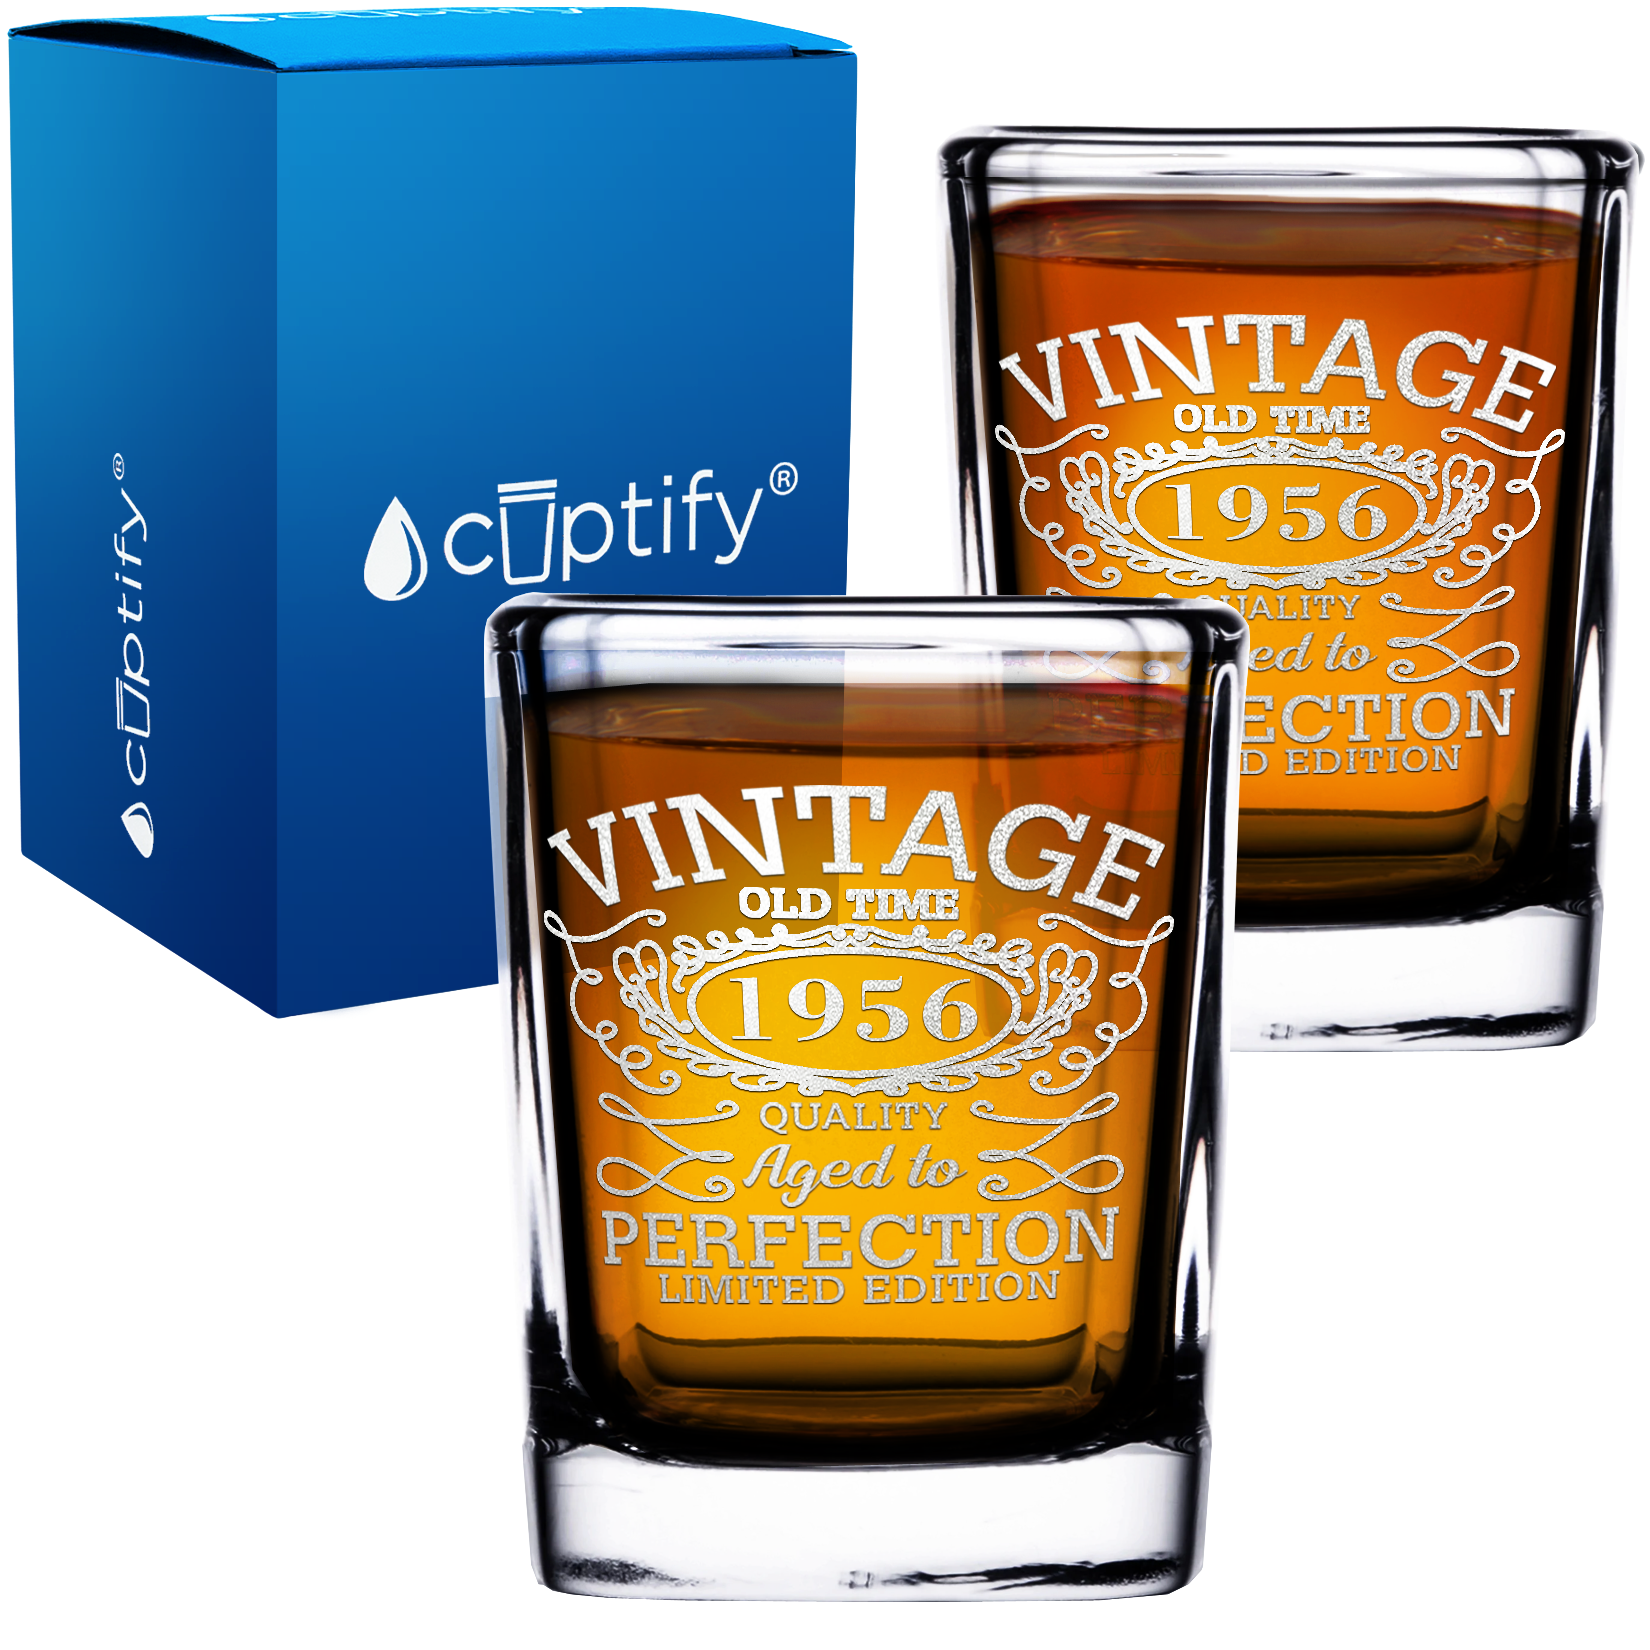 66th Birthday Vintage 66 Years Old Time 1956 Quality 2oz Square Shot Glasses - Set of 2